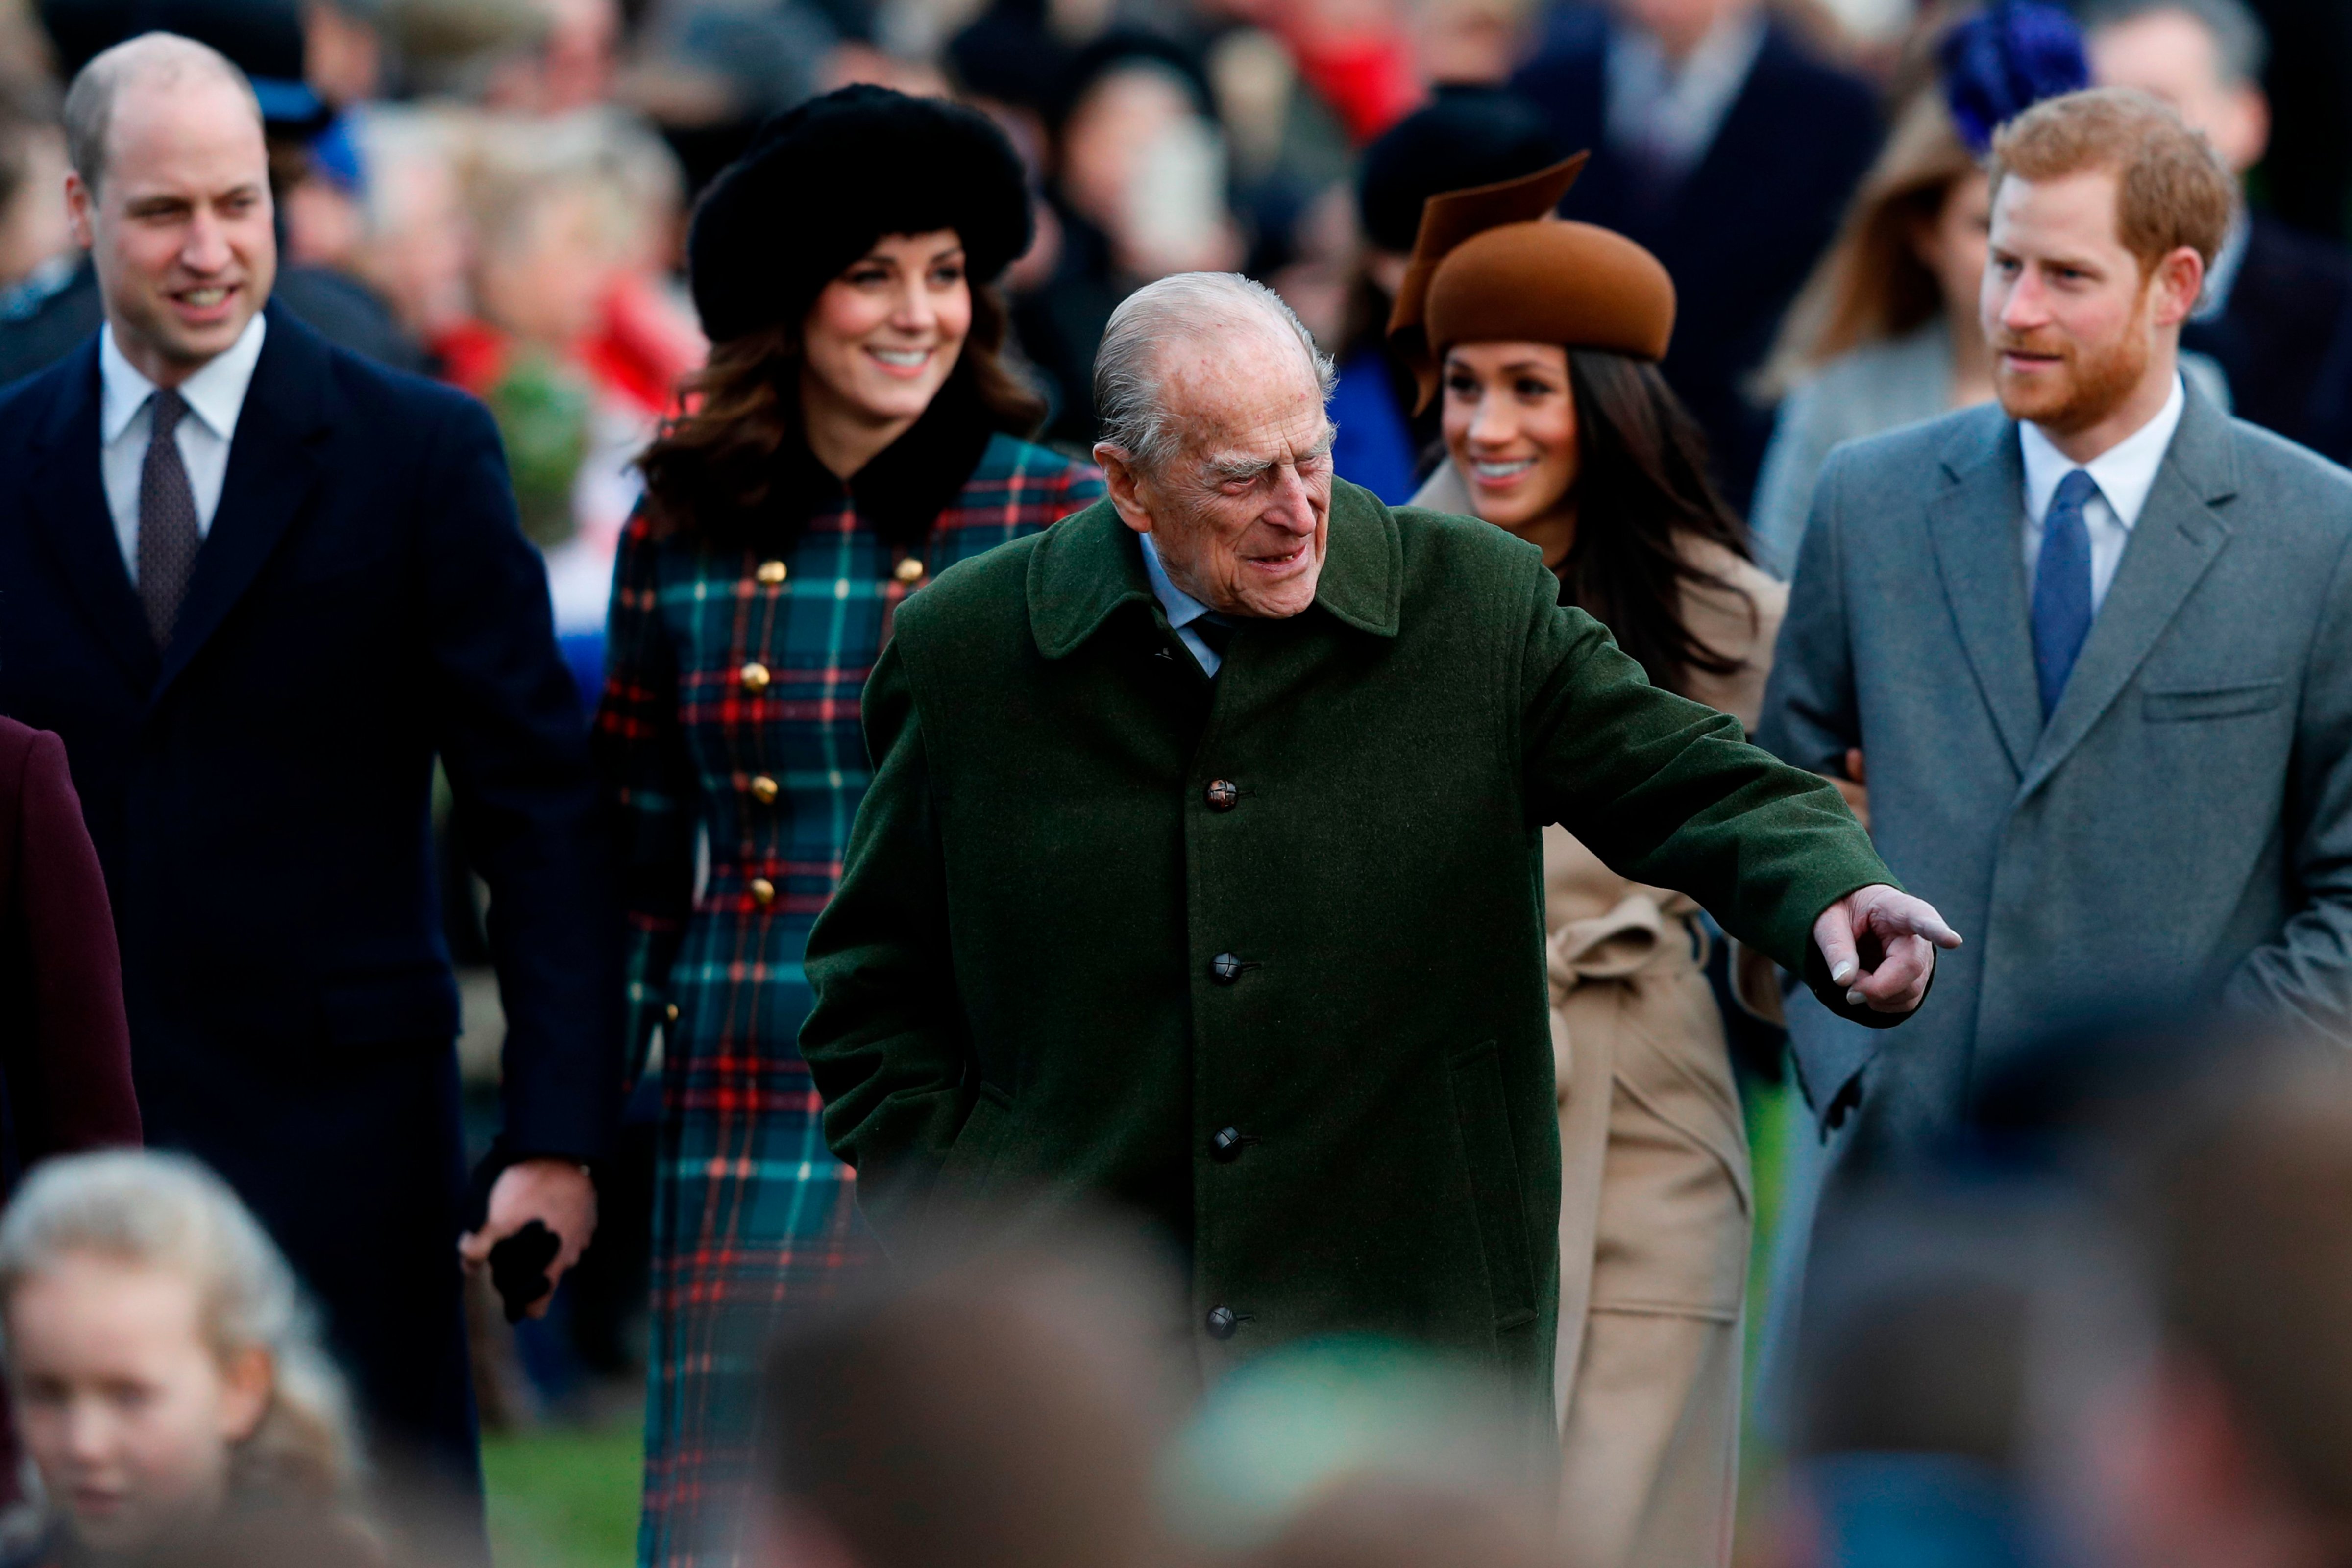 Britain's Prince Philip, Duke of Edinburgh (C) gestures as he is followed by (L-R) Britain's Prince William, Duke of Cambridge, Britain's Catherine, Duchess of Cambridge, US actress and fiancee of Britain's Prince Harry Meghan Markle and Britain's Prince Harry arriving to attend the Royal Family's traditional Christmas Day church service at St Mary Magdalene Church in Sandringham, Norfolk, eastern England, on December 25, 2017. (ADRIAN DENNIS—AFP/Getty Images)